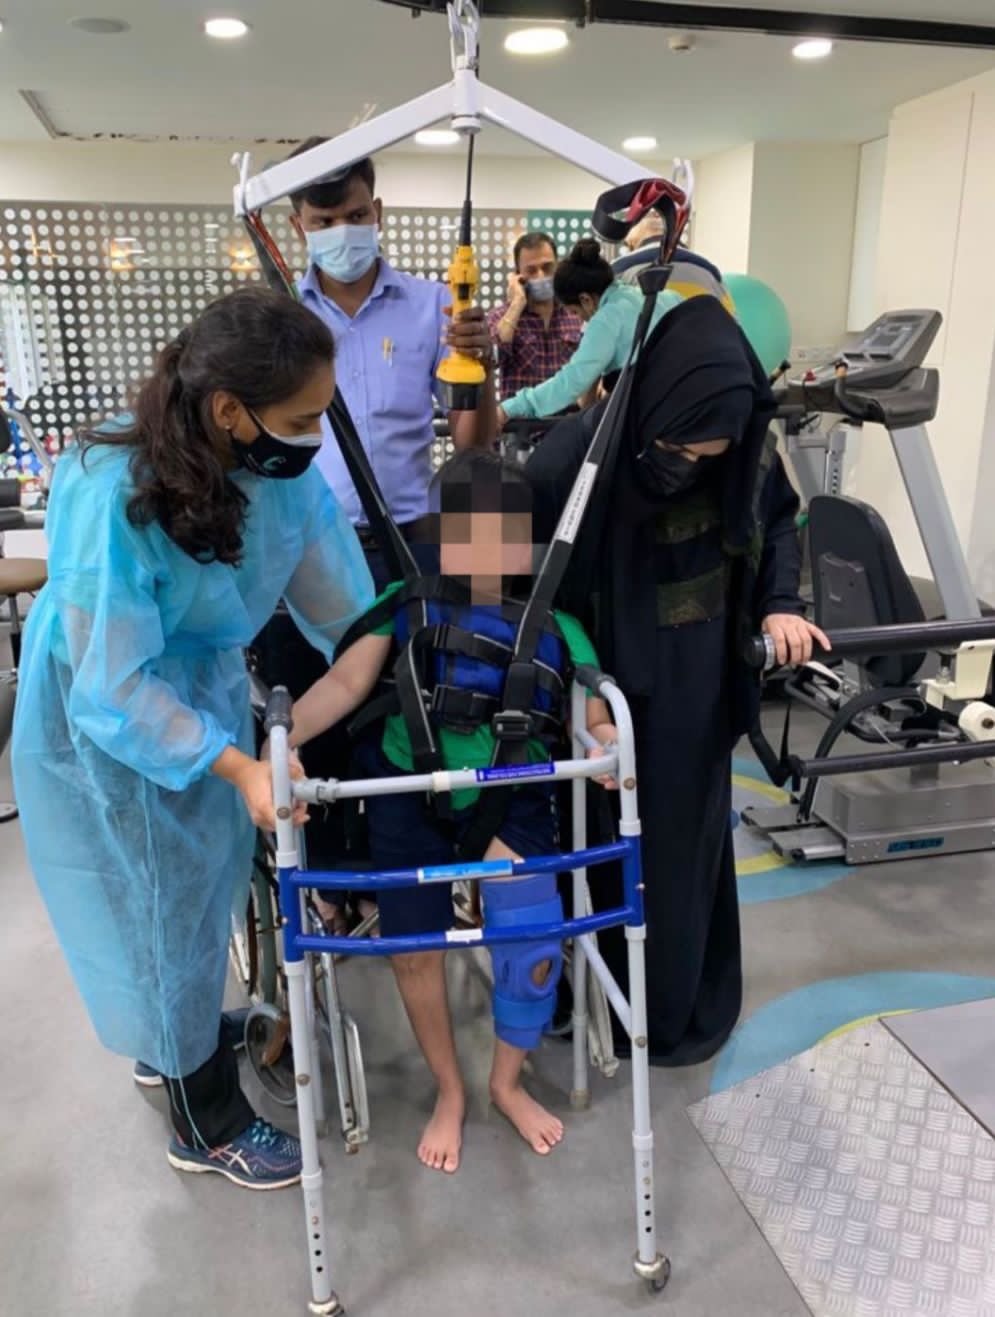 A 10-year-old child with a genetic condition called osteogenesis imperfecta walks again after 4 years with an Aquatic Therapy treatment